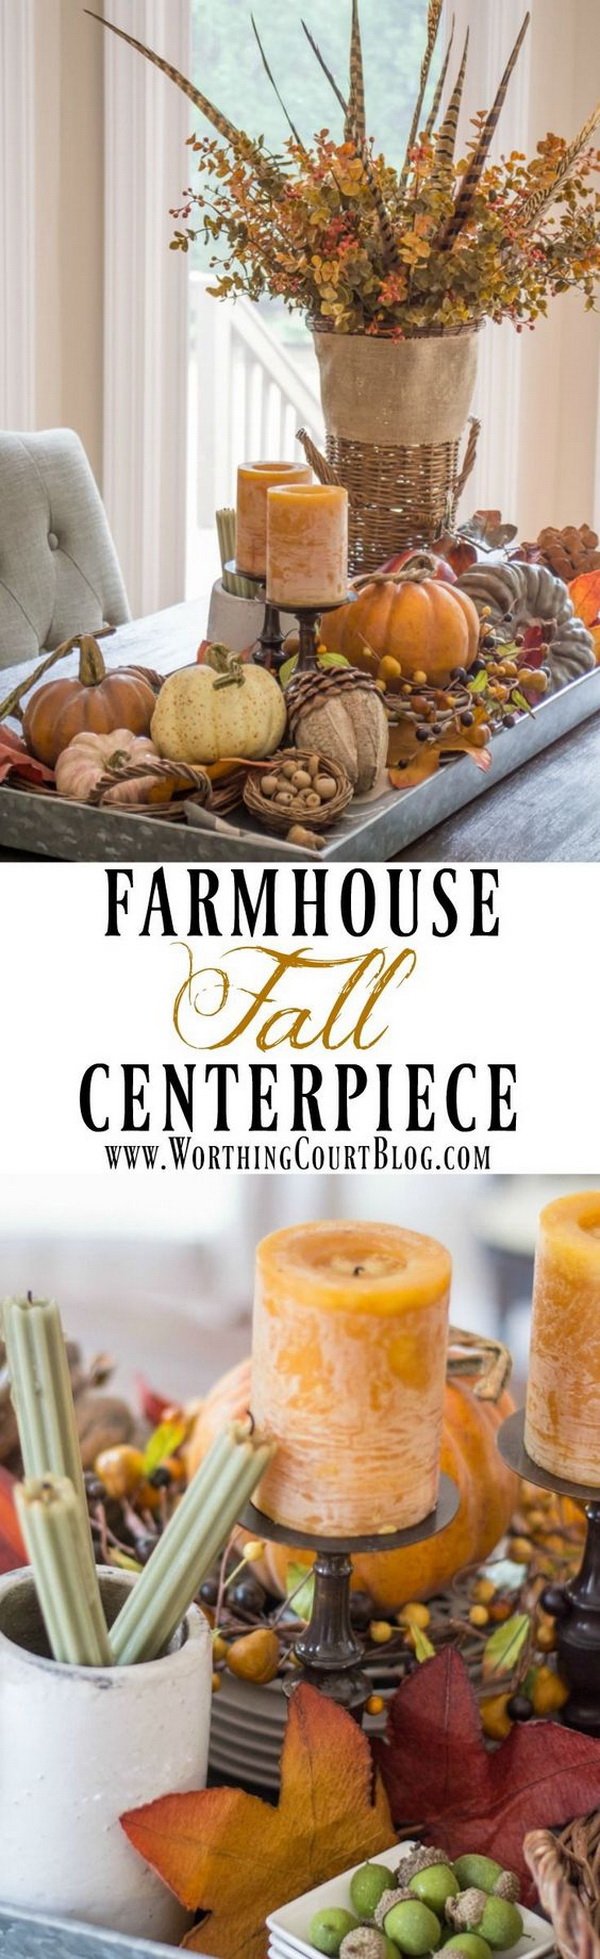 Rustic Farmhouse Fall Centerpiece. Get a galvanized metal tray filled with fall textures and colors. This will be the the perfect rustic farmhouse fall centerpiece.